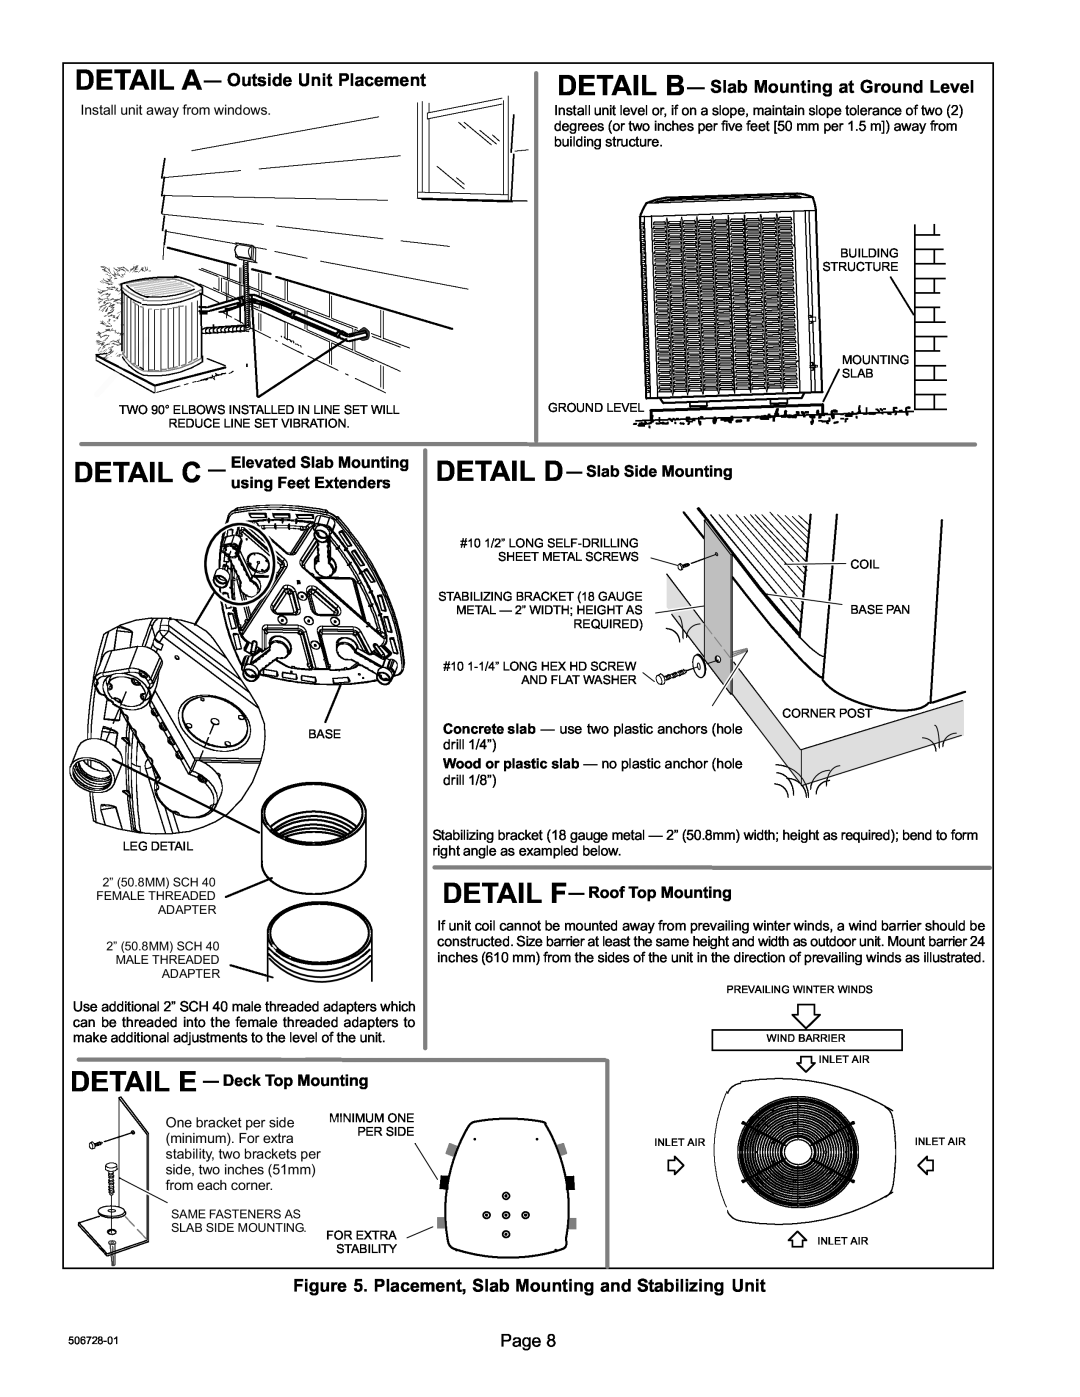 Lennox International Inc 06/11 50672801 installation instructions Detail B, Detail C, DETAIL A Outside Unit Placement, Page 